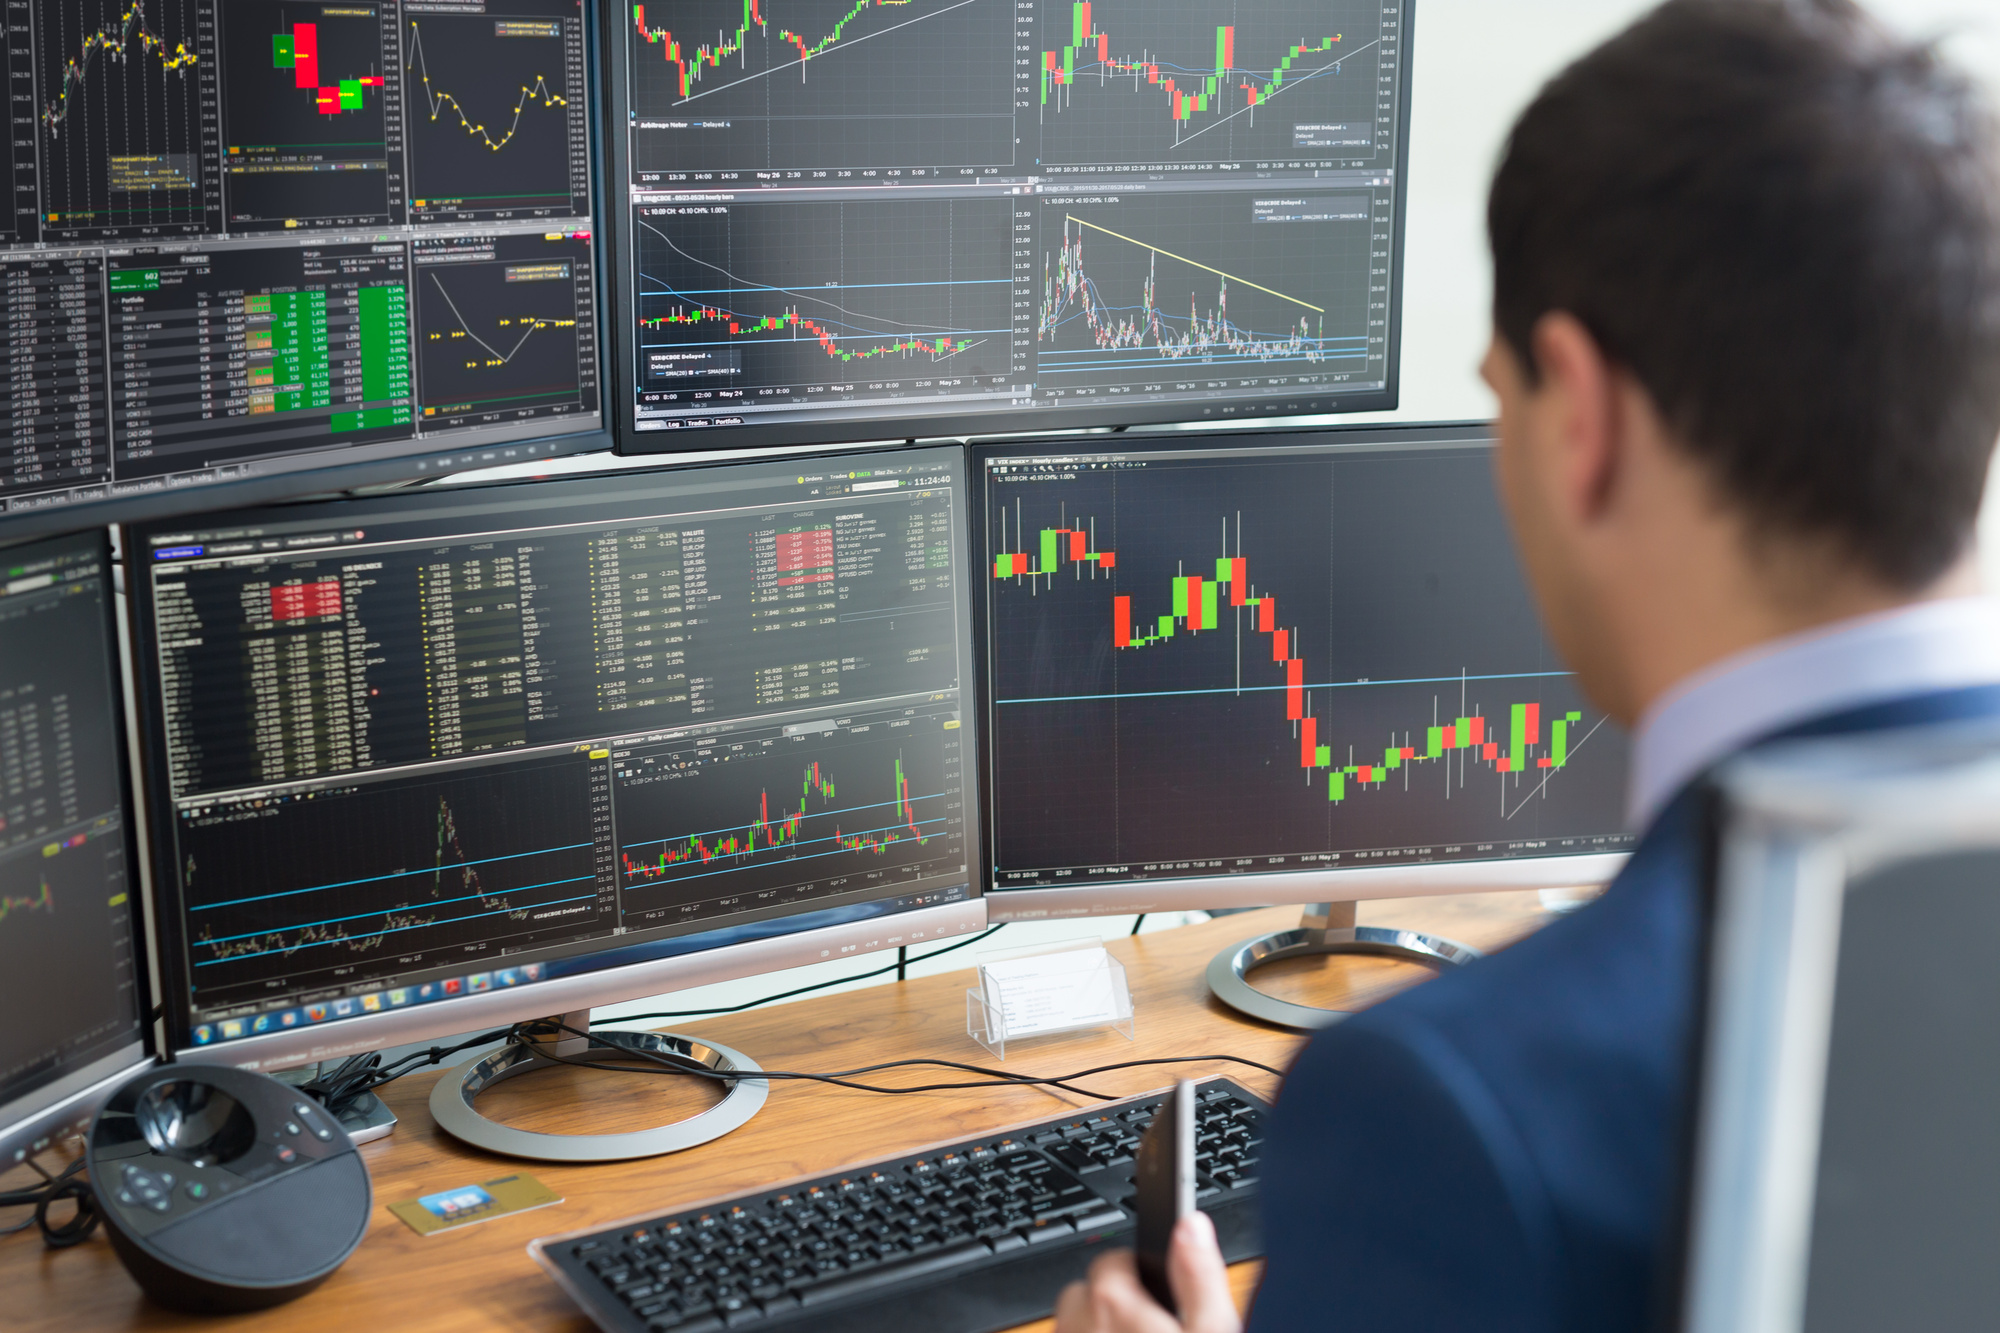 how to become a stockbroker